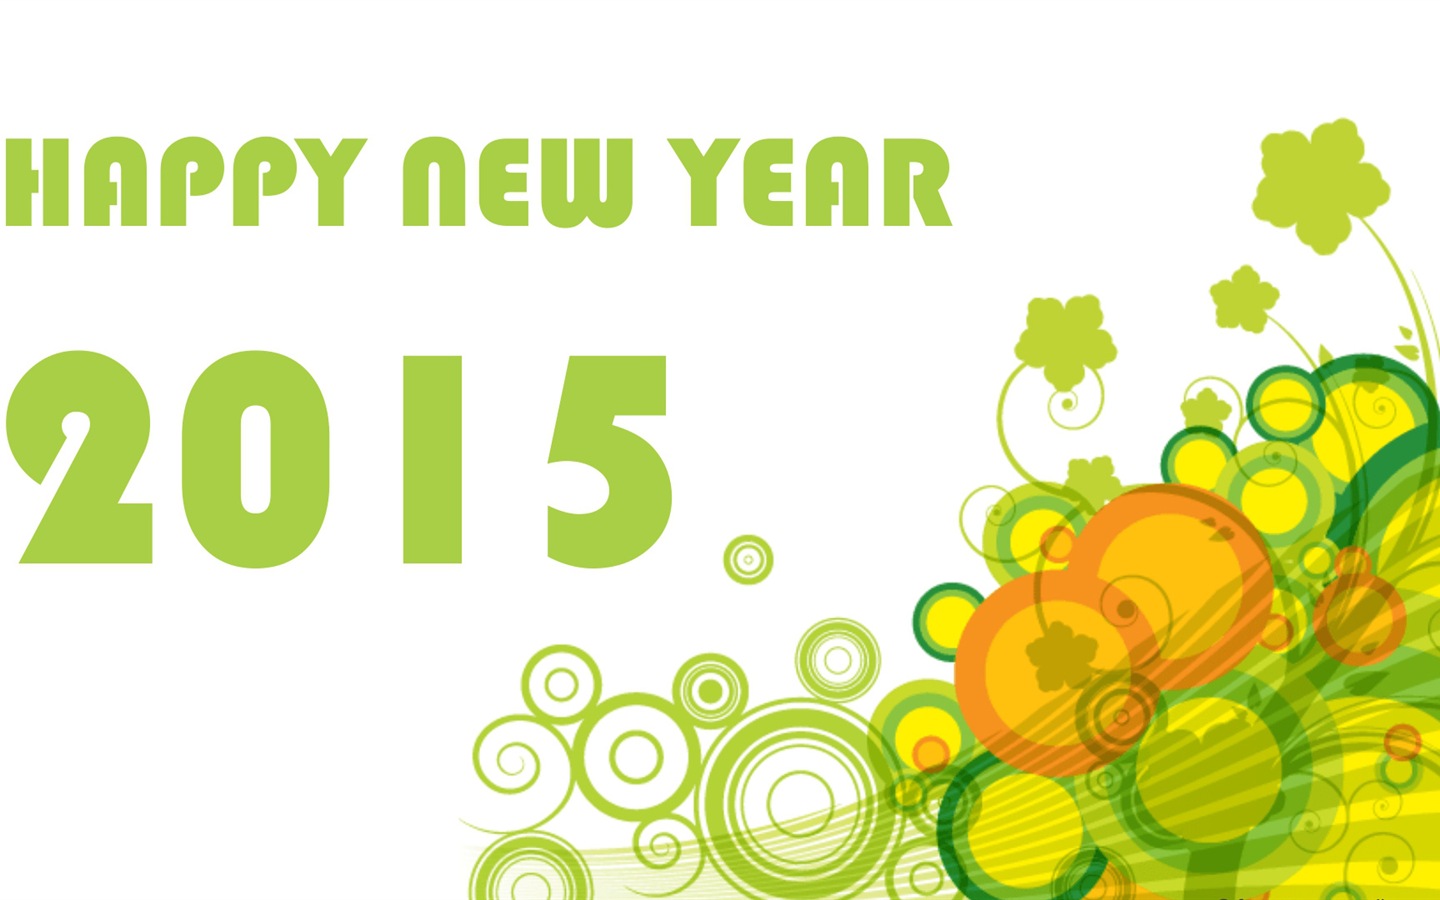 2015 New Year theme HD wallpapers (1) #10 - 1440x900